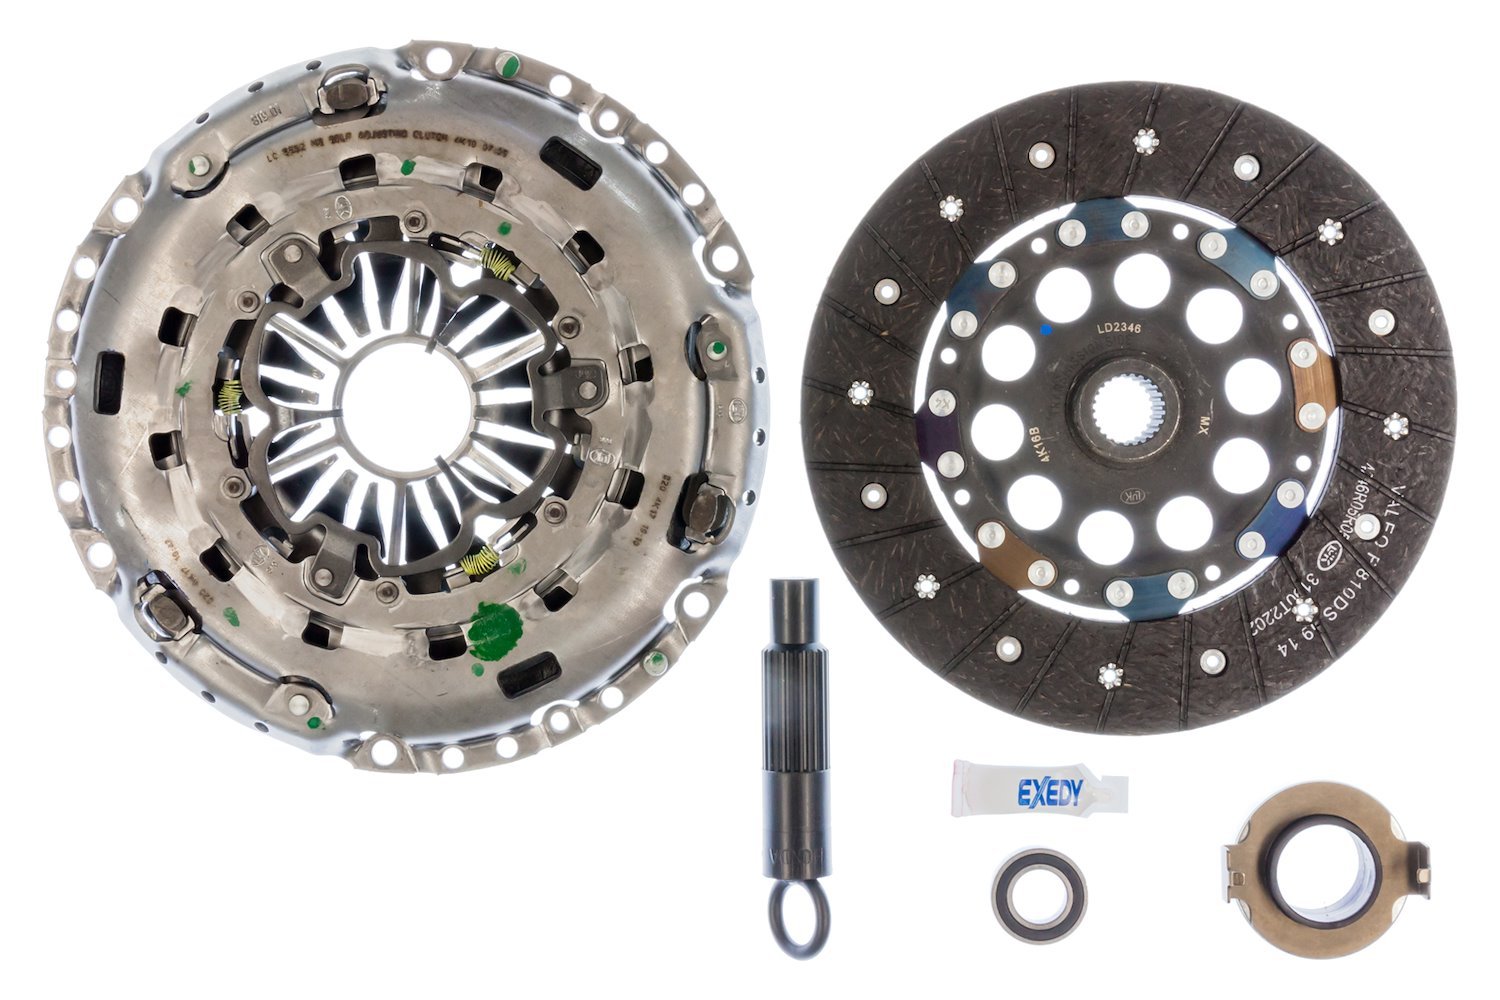 HCK1007 OEM Replacement Transmission Clutch Kit, 2003-2003 Acura Cl V6